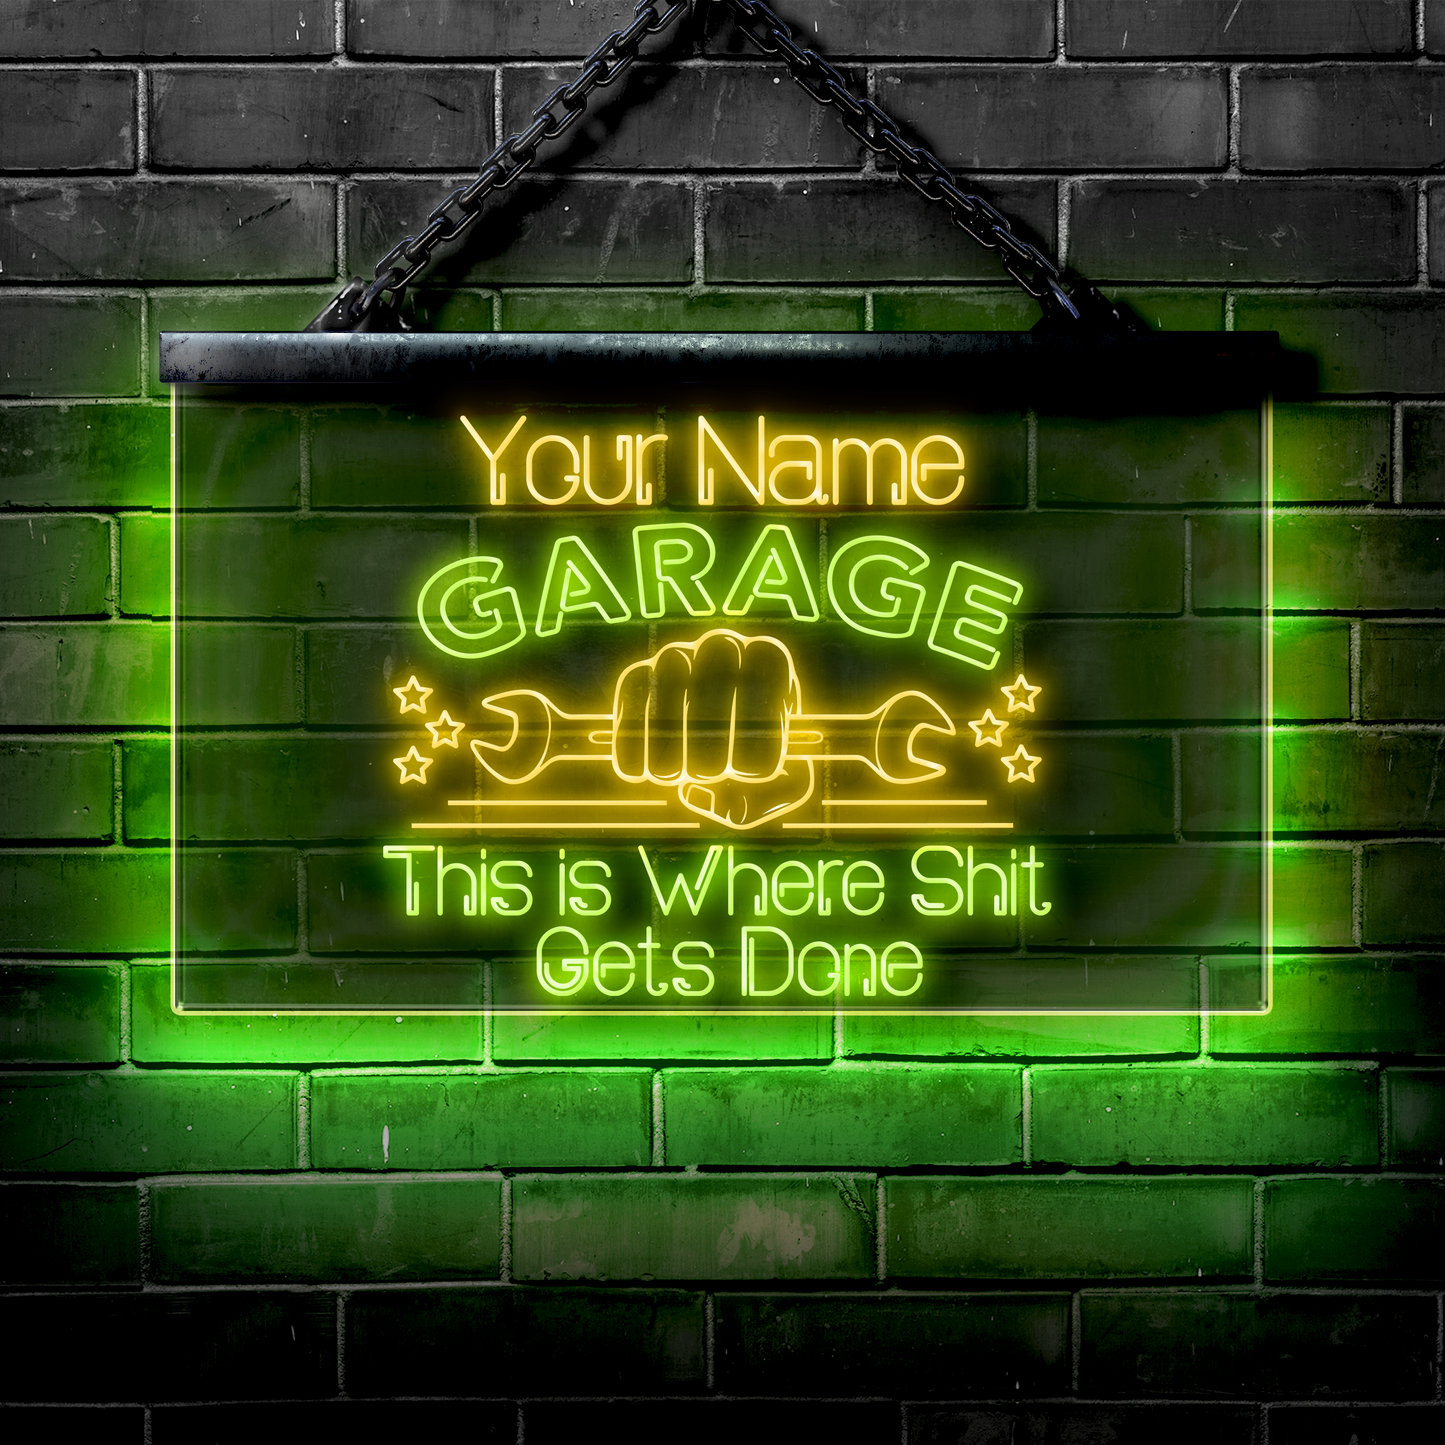 Personalized LED Garage Sign: This is Where Shit Gets Done